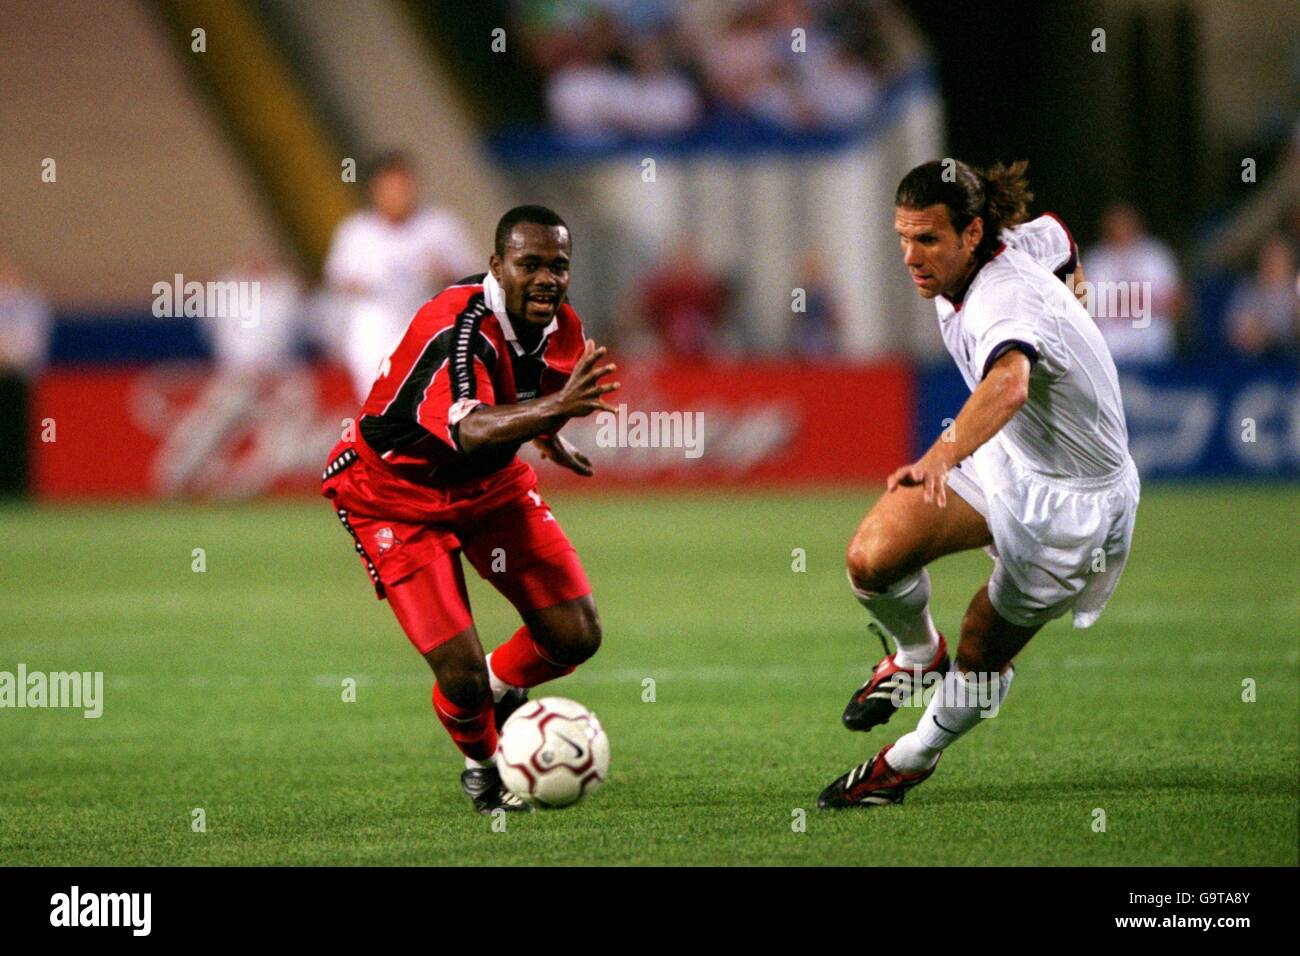 Soccer - World Cup 2002 Qualifier - CONCACAF Section - Final Group - USA v Trinidad and Tobago. Trinidad and Tobago's Stern John (l) takes on the USA's Jeff Agoos (r) Stock Photo